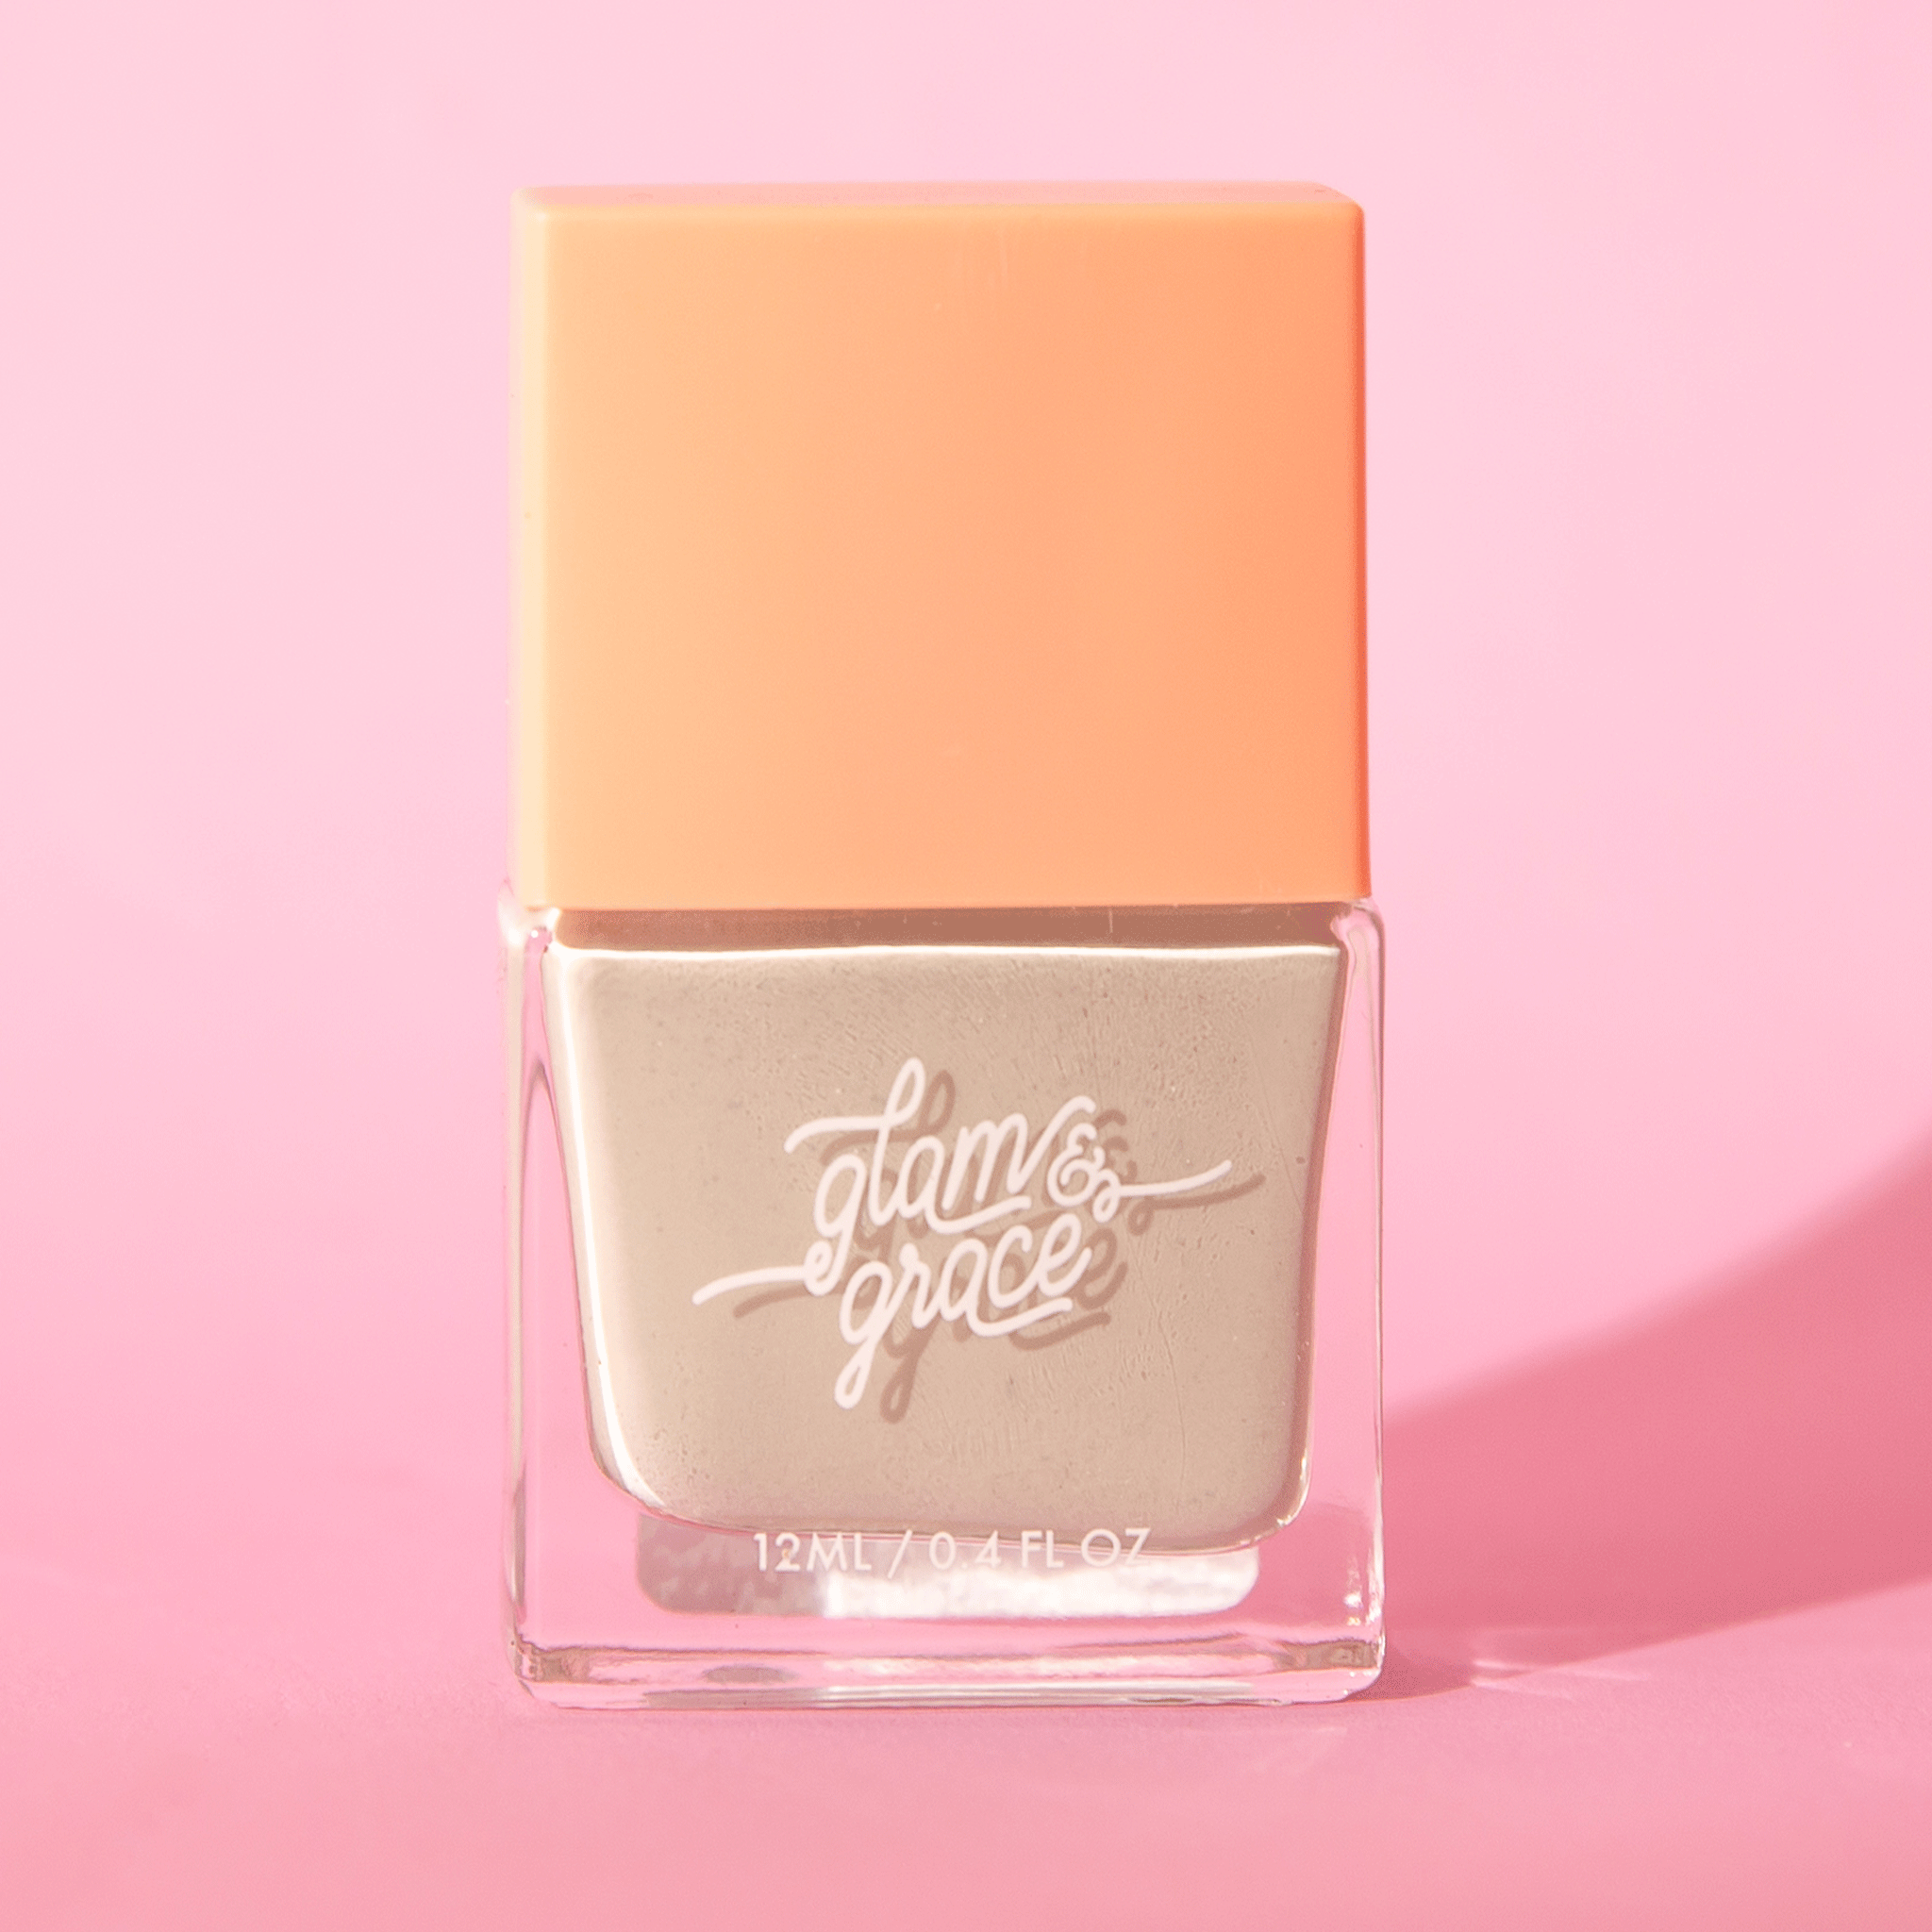 A sage green satin nail polish in a glass bottle with a peachy square lid.